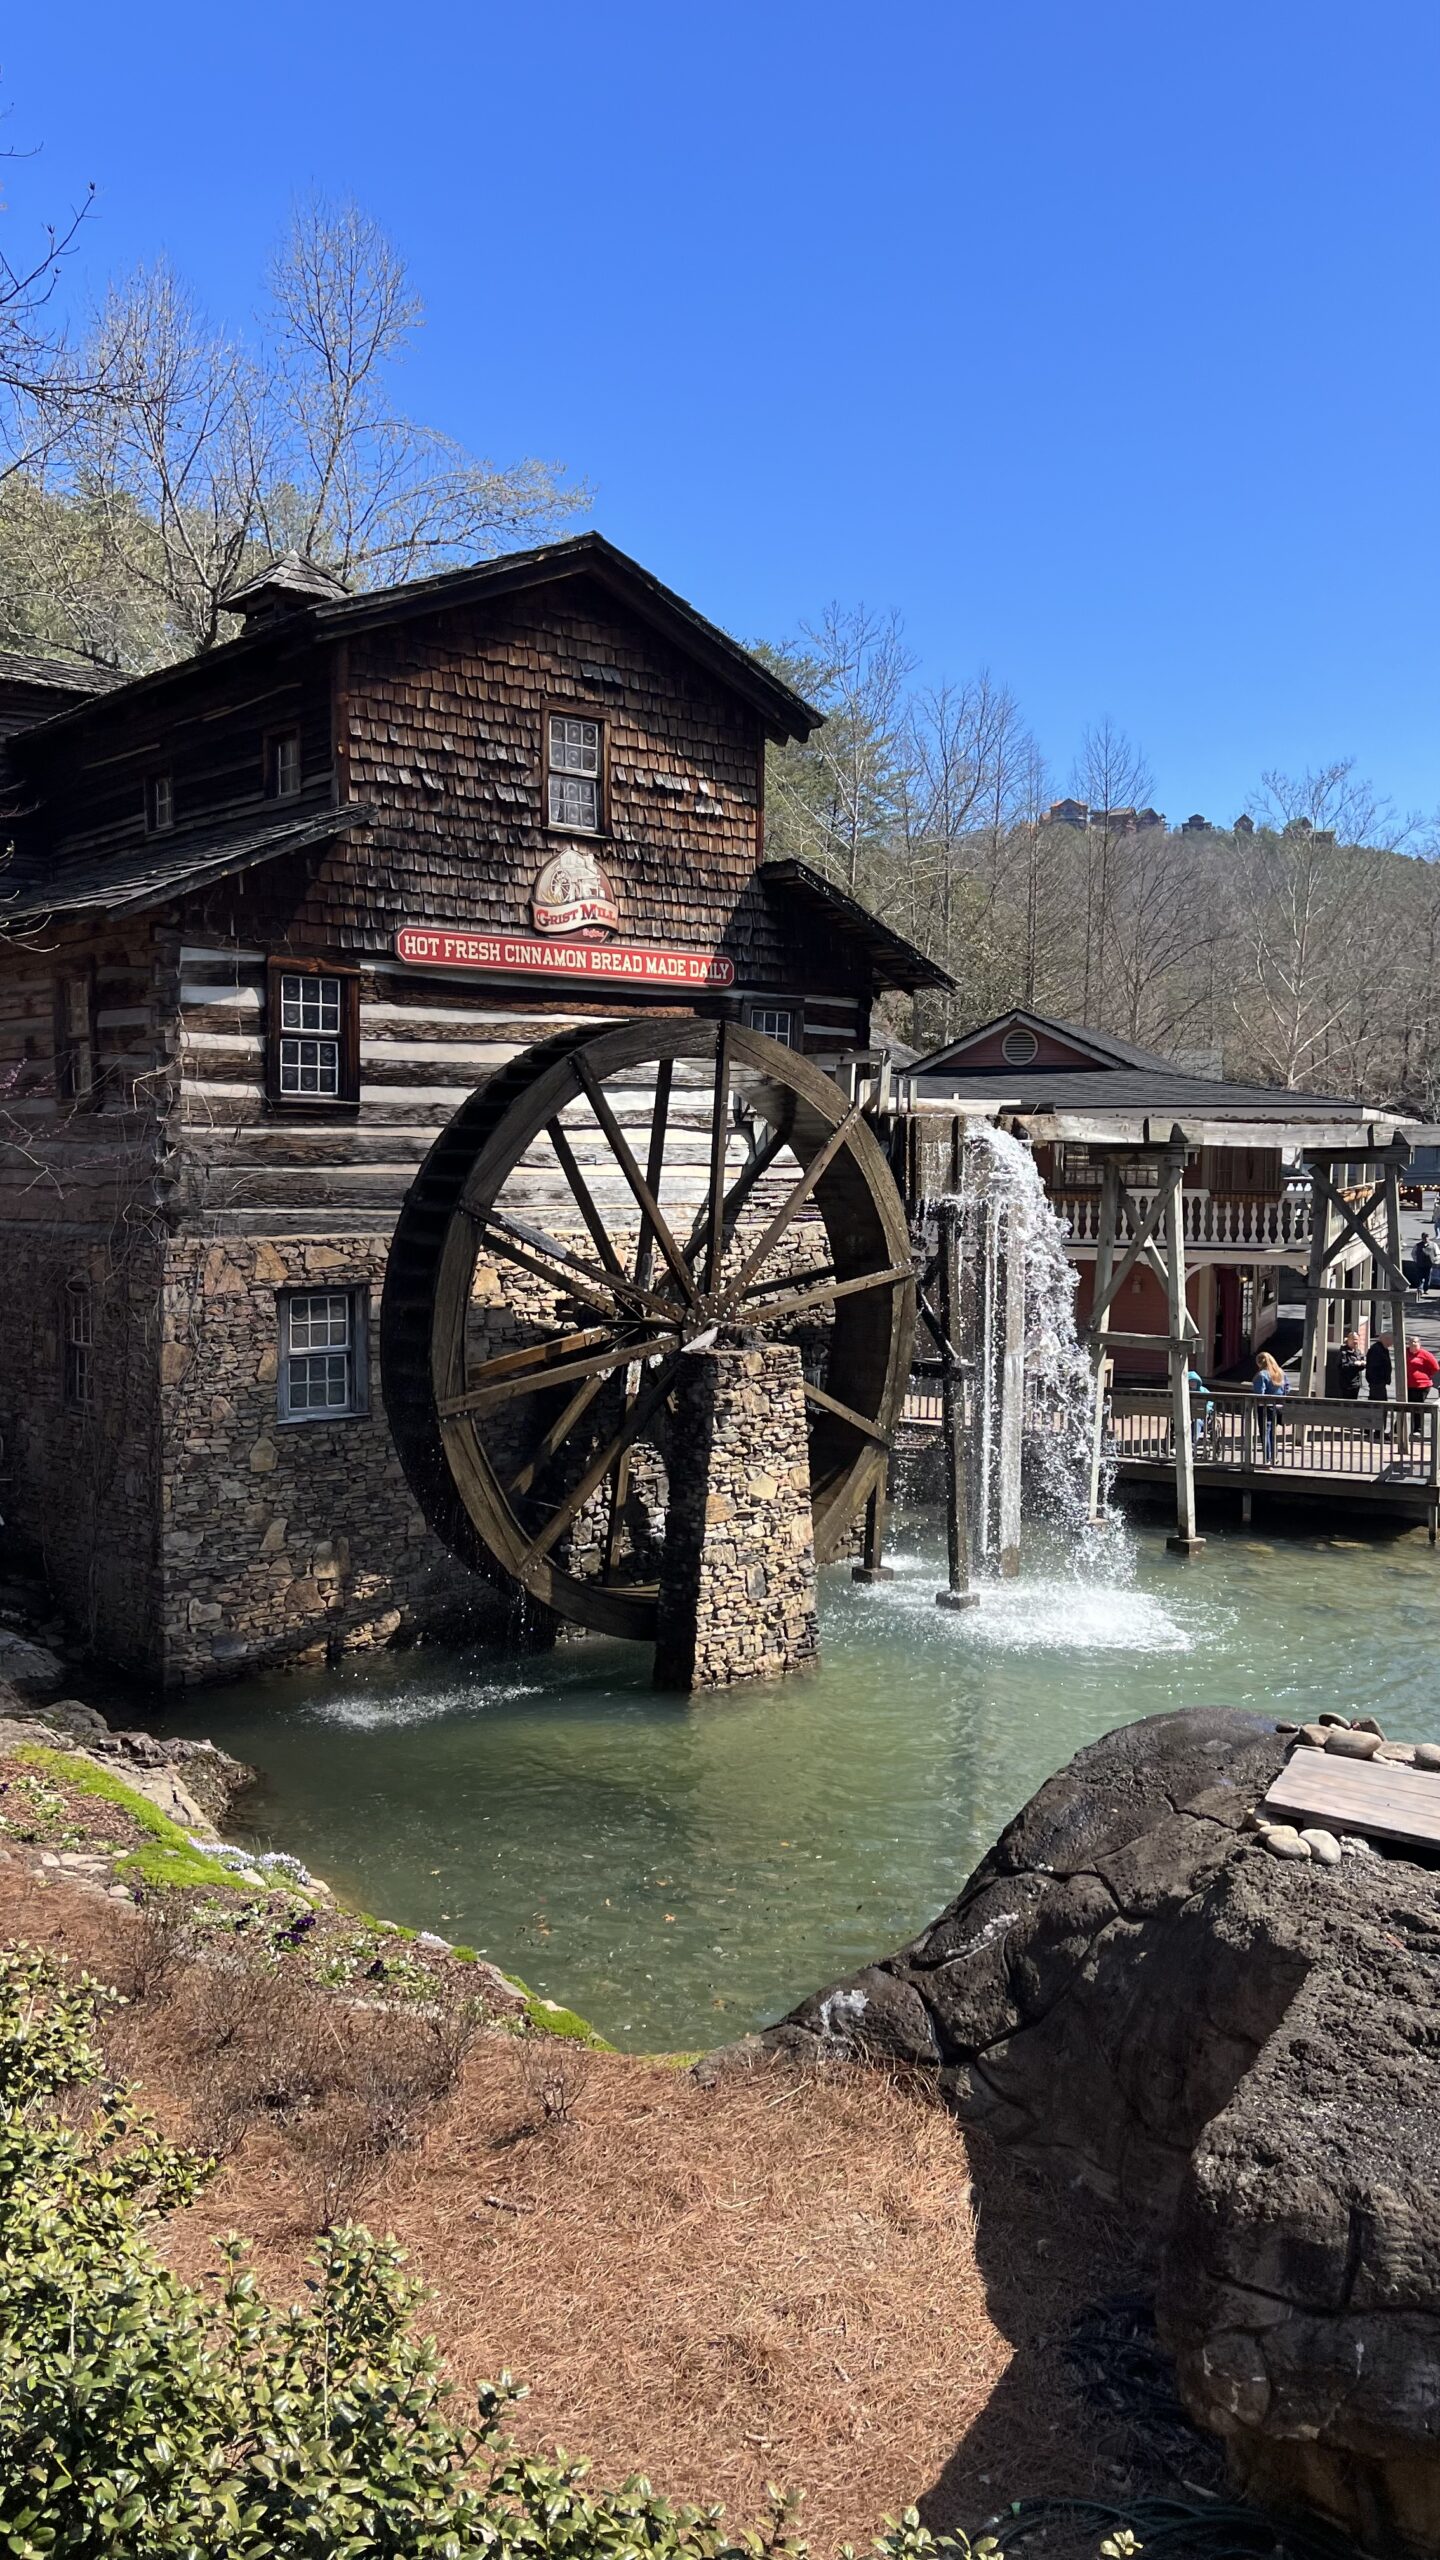 Famous Cinnamon Bread from Grist Mill, My Guide for Visiting Dollywood Theme Park in Tennessee